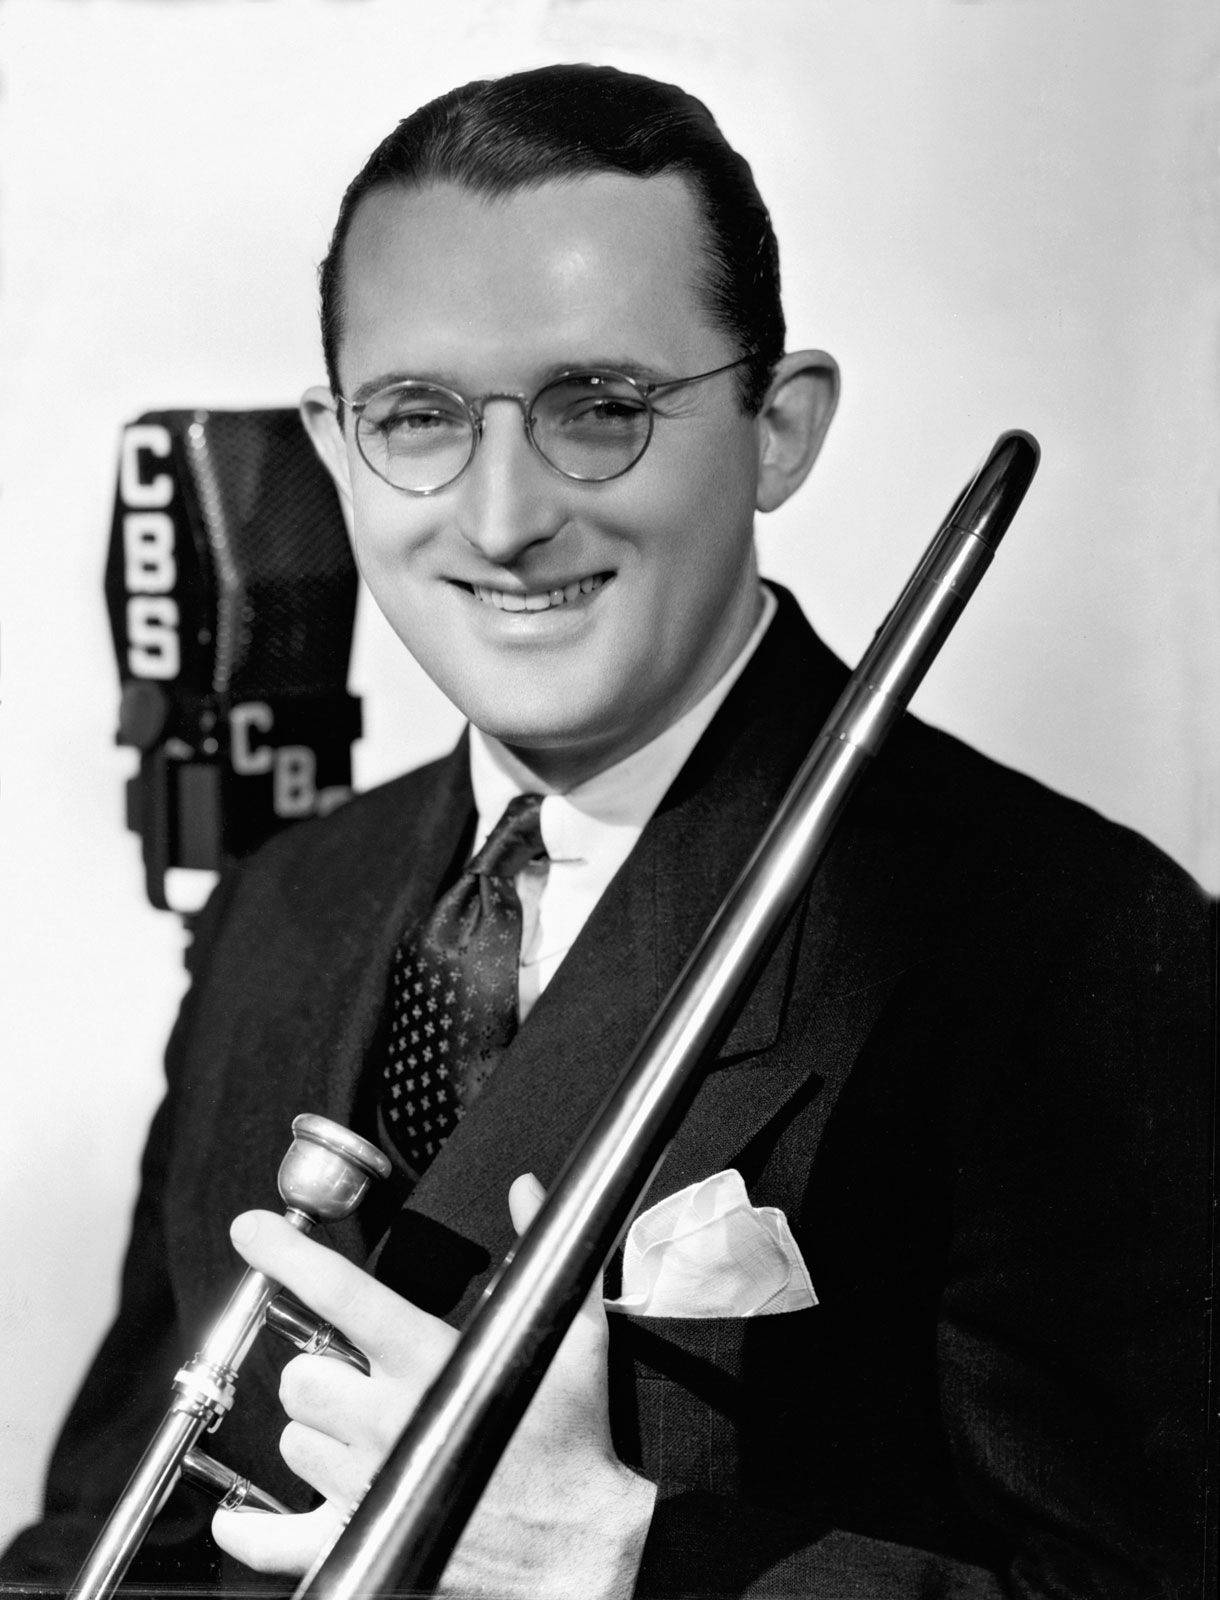 Tommy Dorsey's engaging smile in a black and white portrait Wallpaper